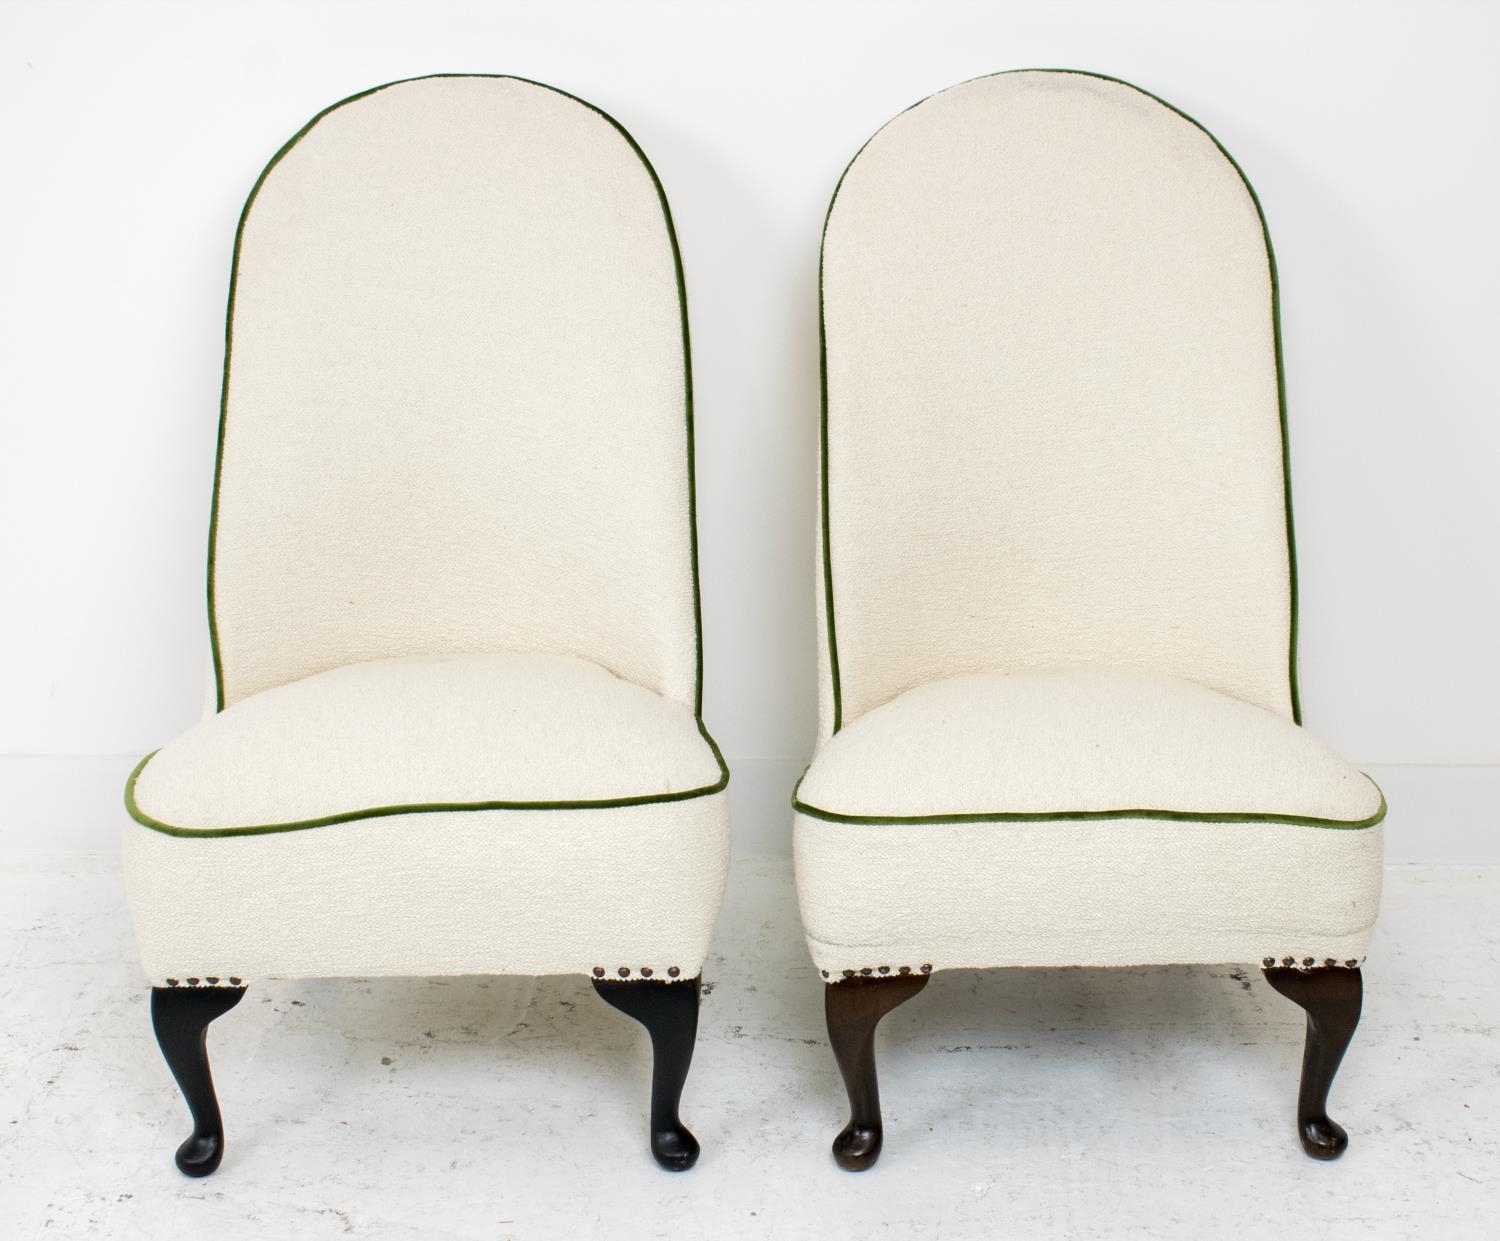 SLIPPER CHAIRS, a pair, boucle wool with green velvet piping, 89cm H x 53cm x 65cm. (2) - Image 2 of 4